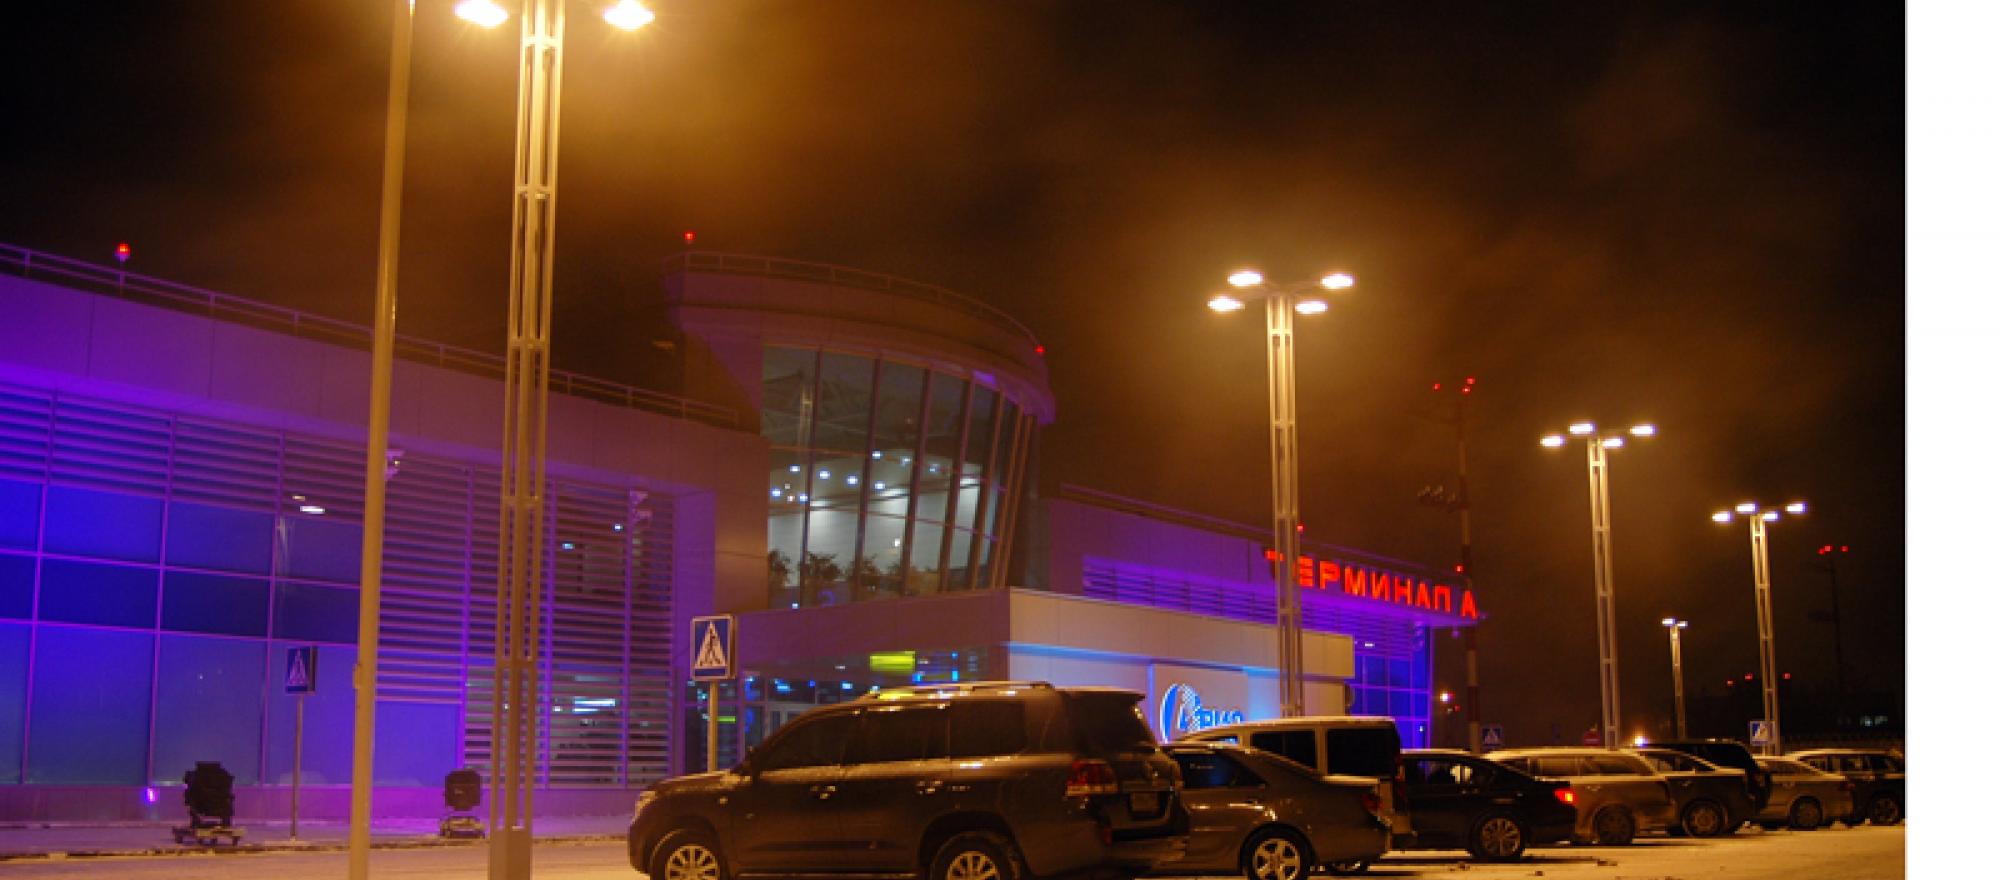 Terminal A at Moscow Sheremetievo Airport